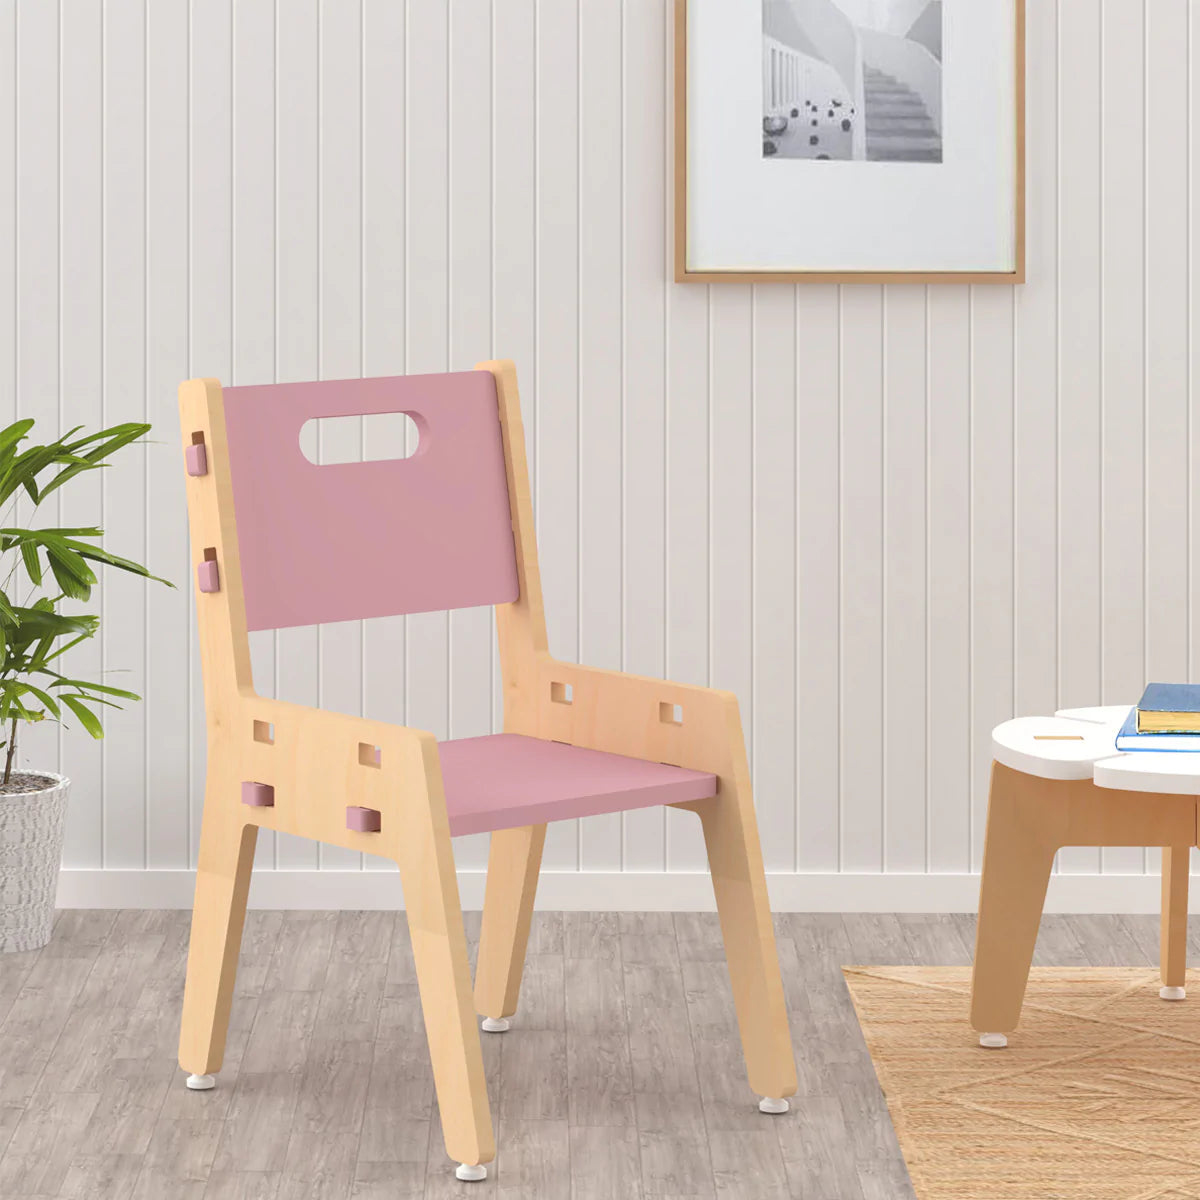 Buy Silver Peach Wooden Chair - Pink - Learning Furniture - SkilloToys.com